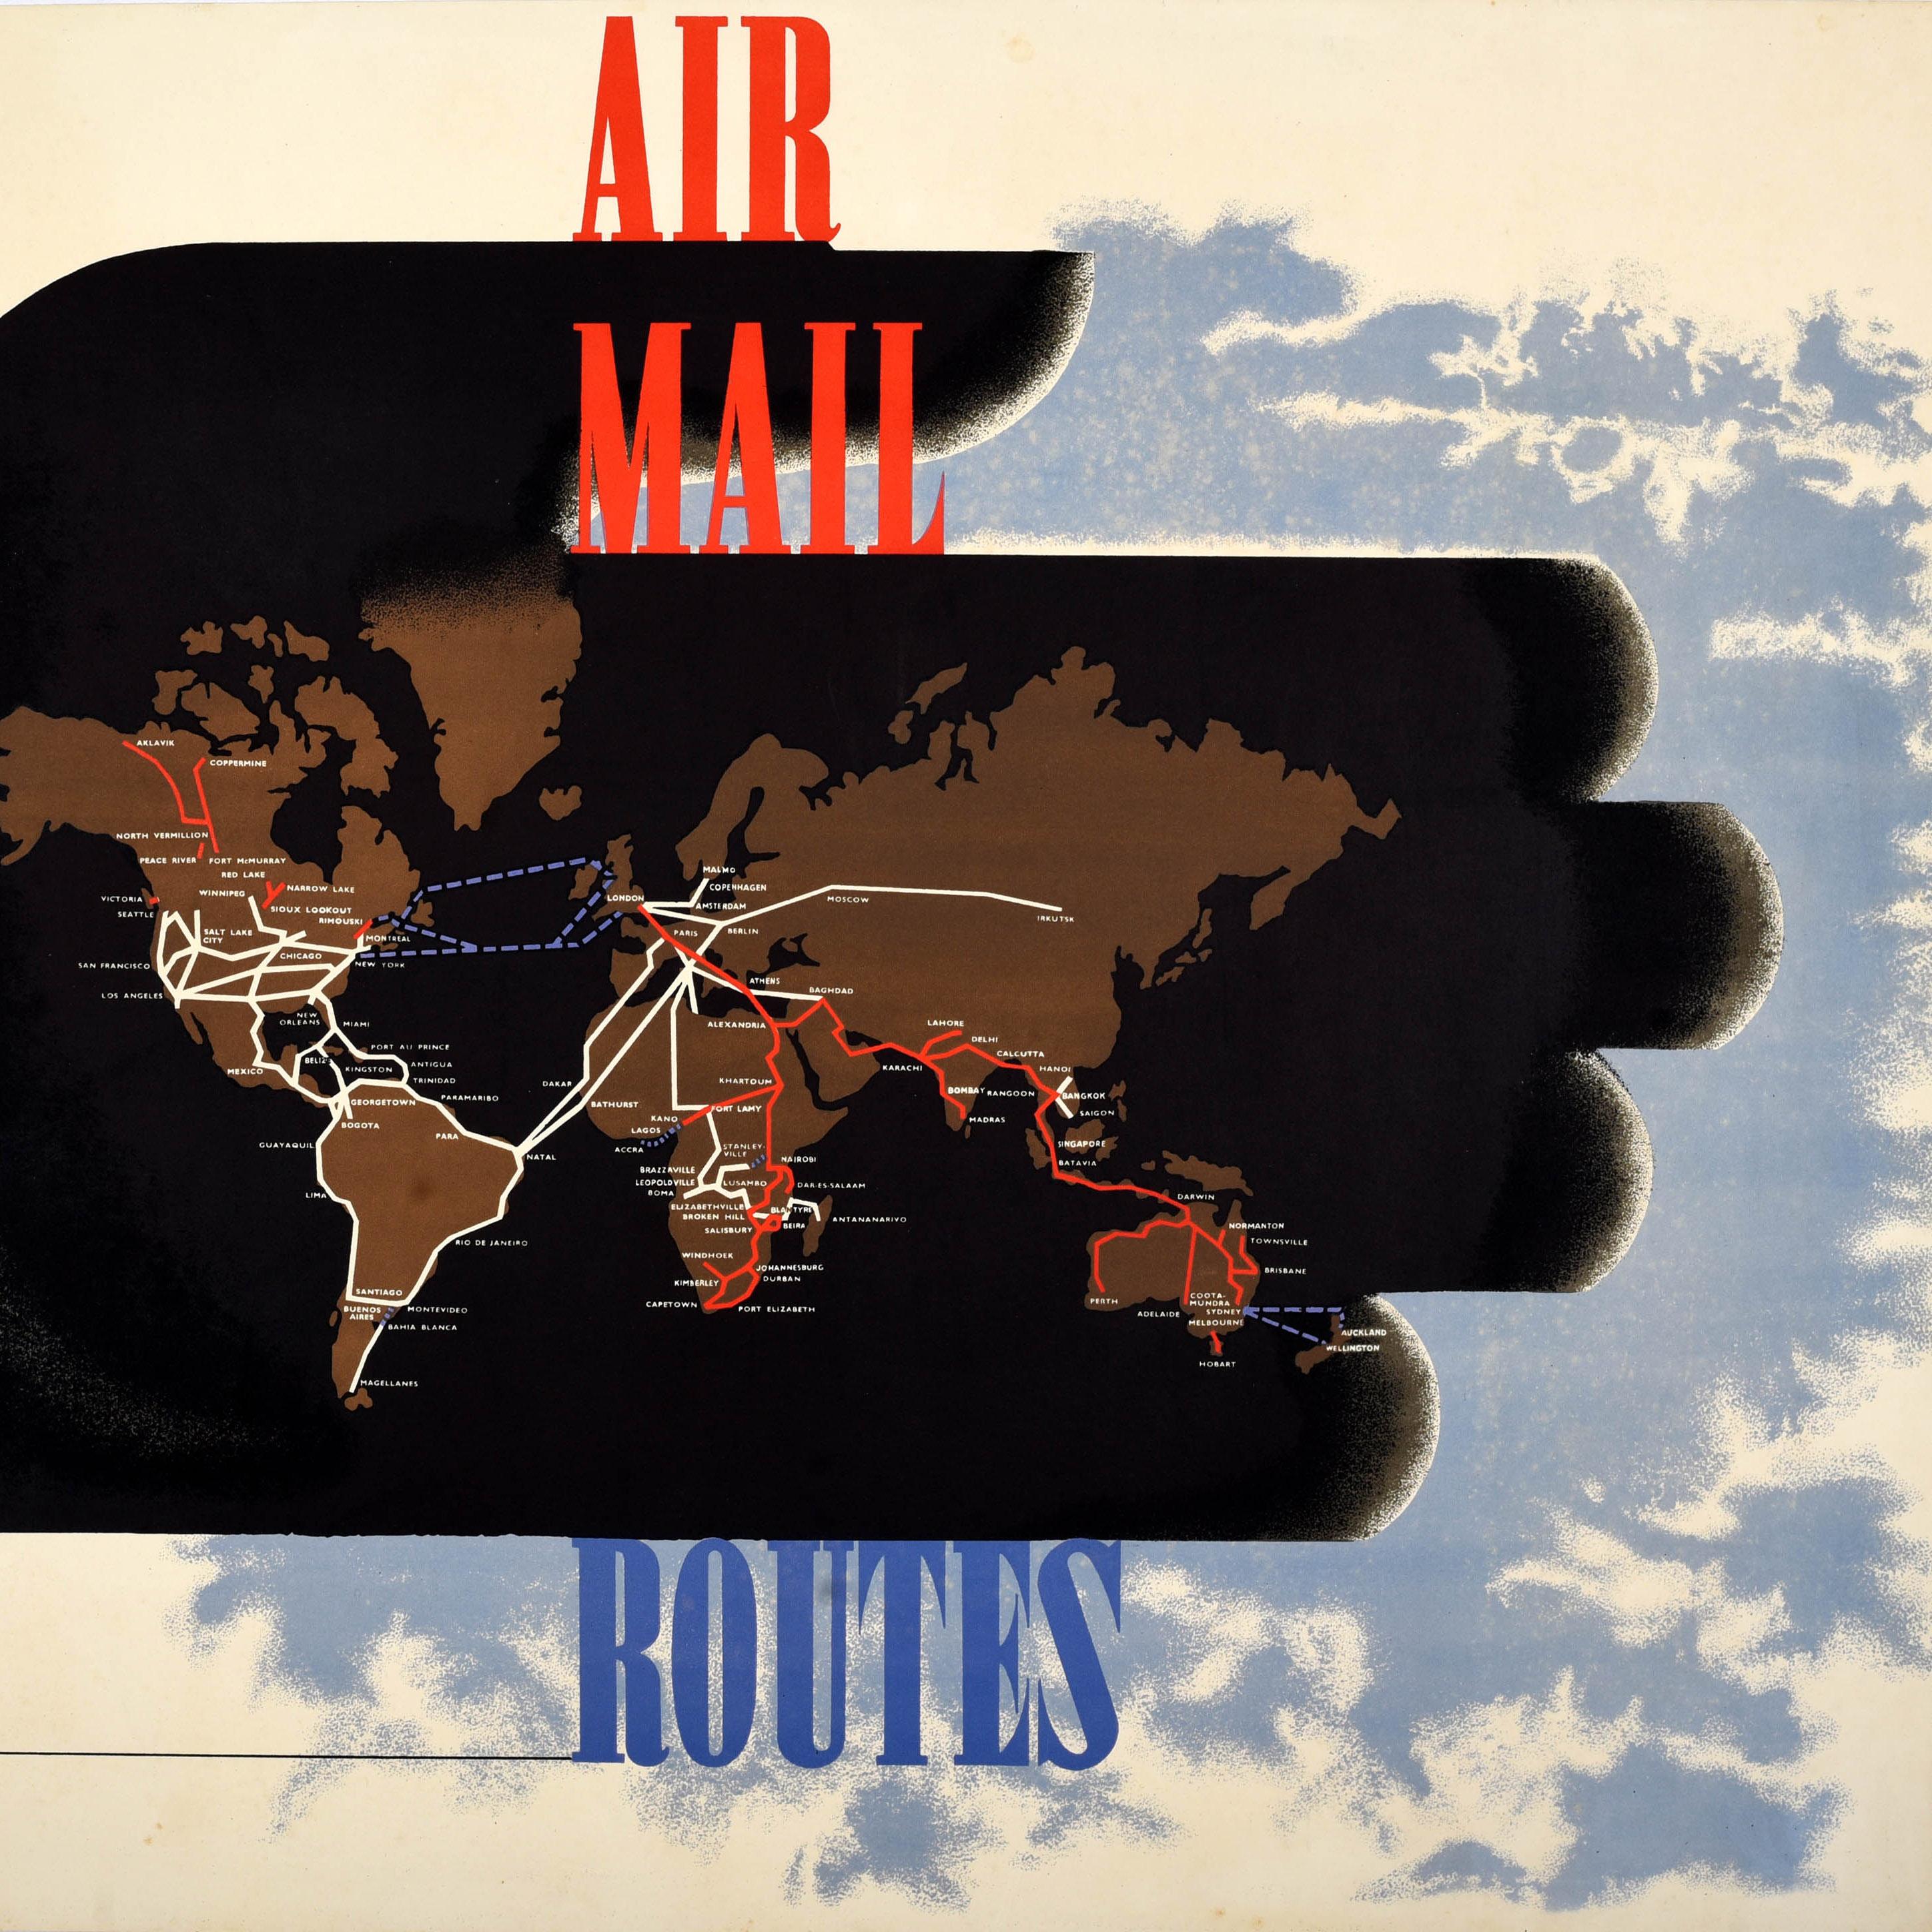 Rare Original Vintage Advertising Poster Air Mail Routes GPO Mcknight Kauffer For Sale 1